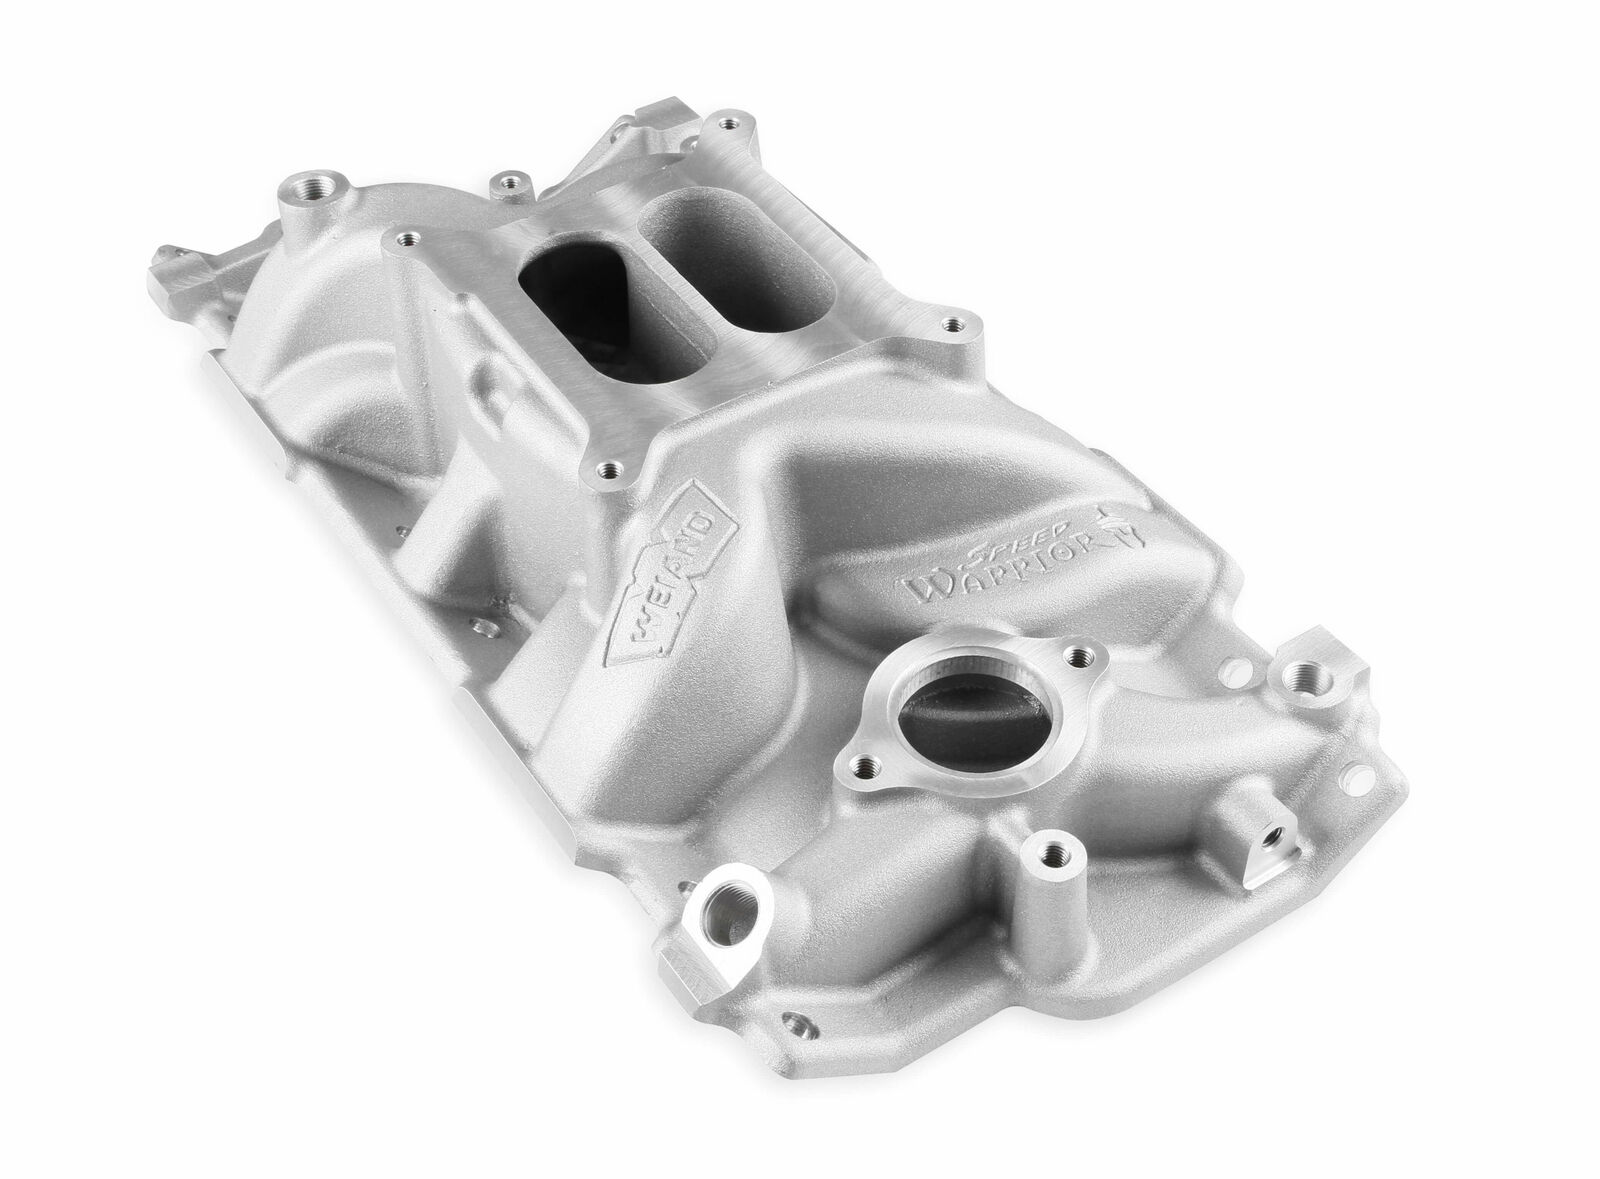 WEIAND 8150 Speed Warrior Dual Plane Intake Manifold 1955-1986 Small Block Chevy